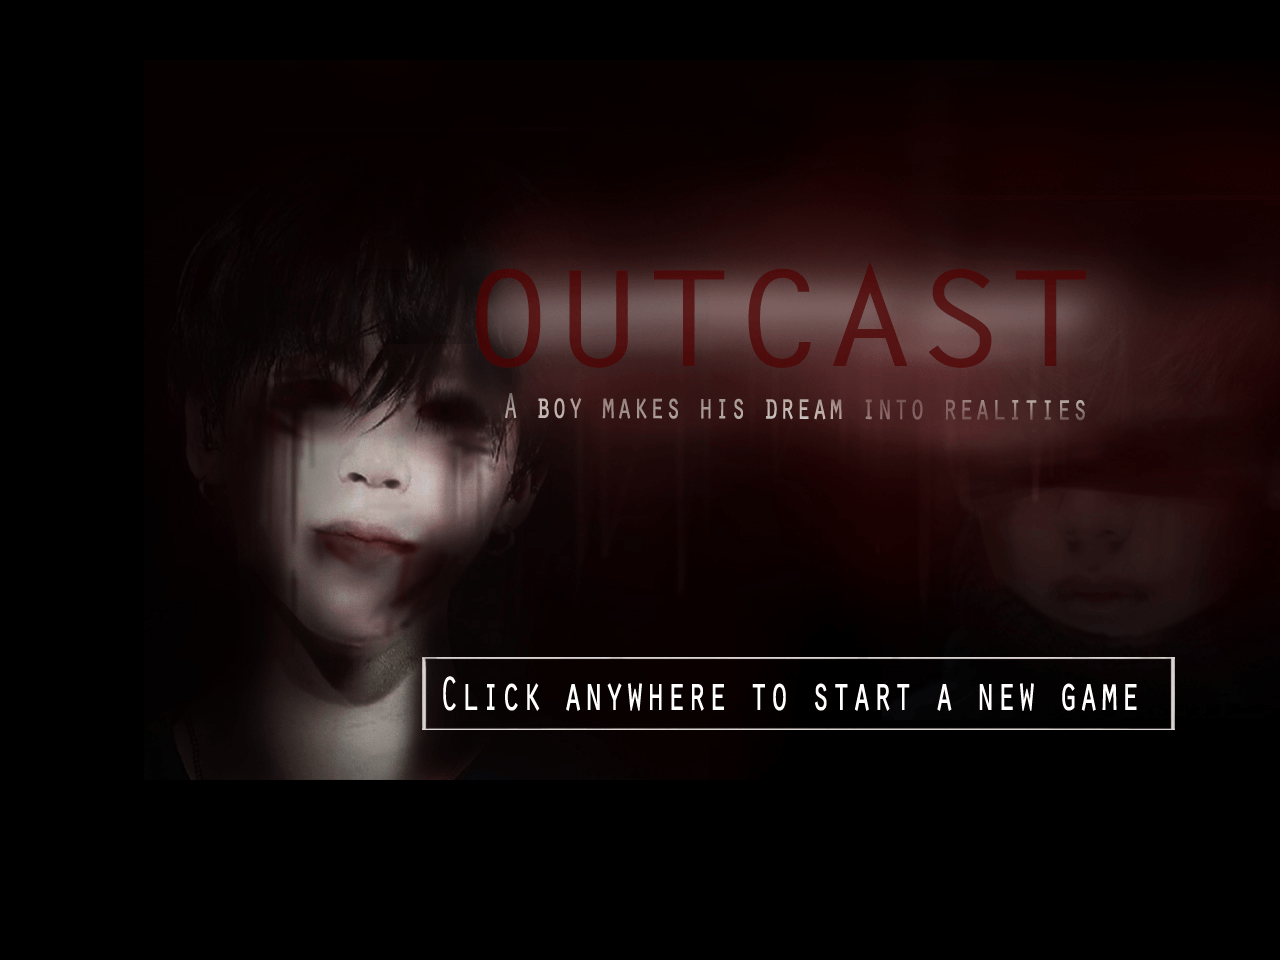 BTS Outcast got me thinking to(o) much